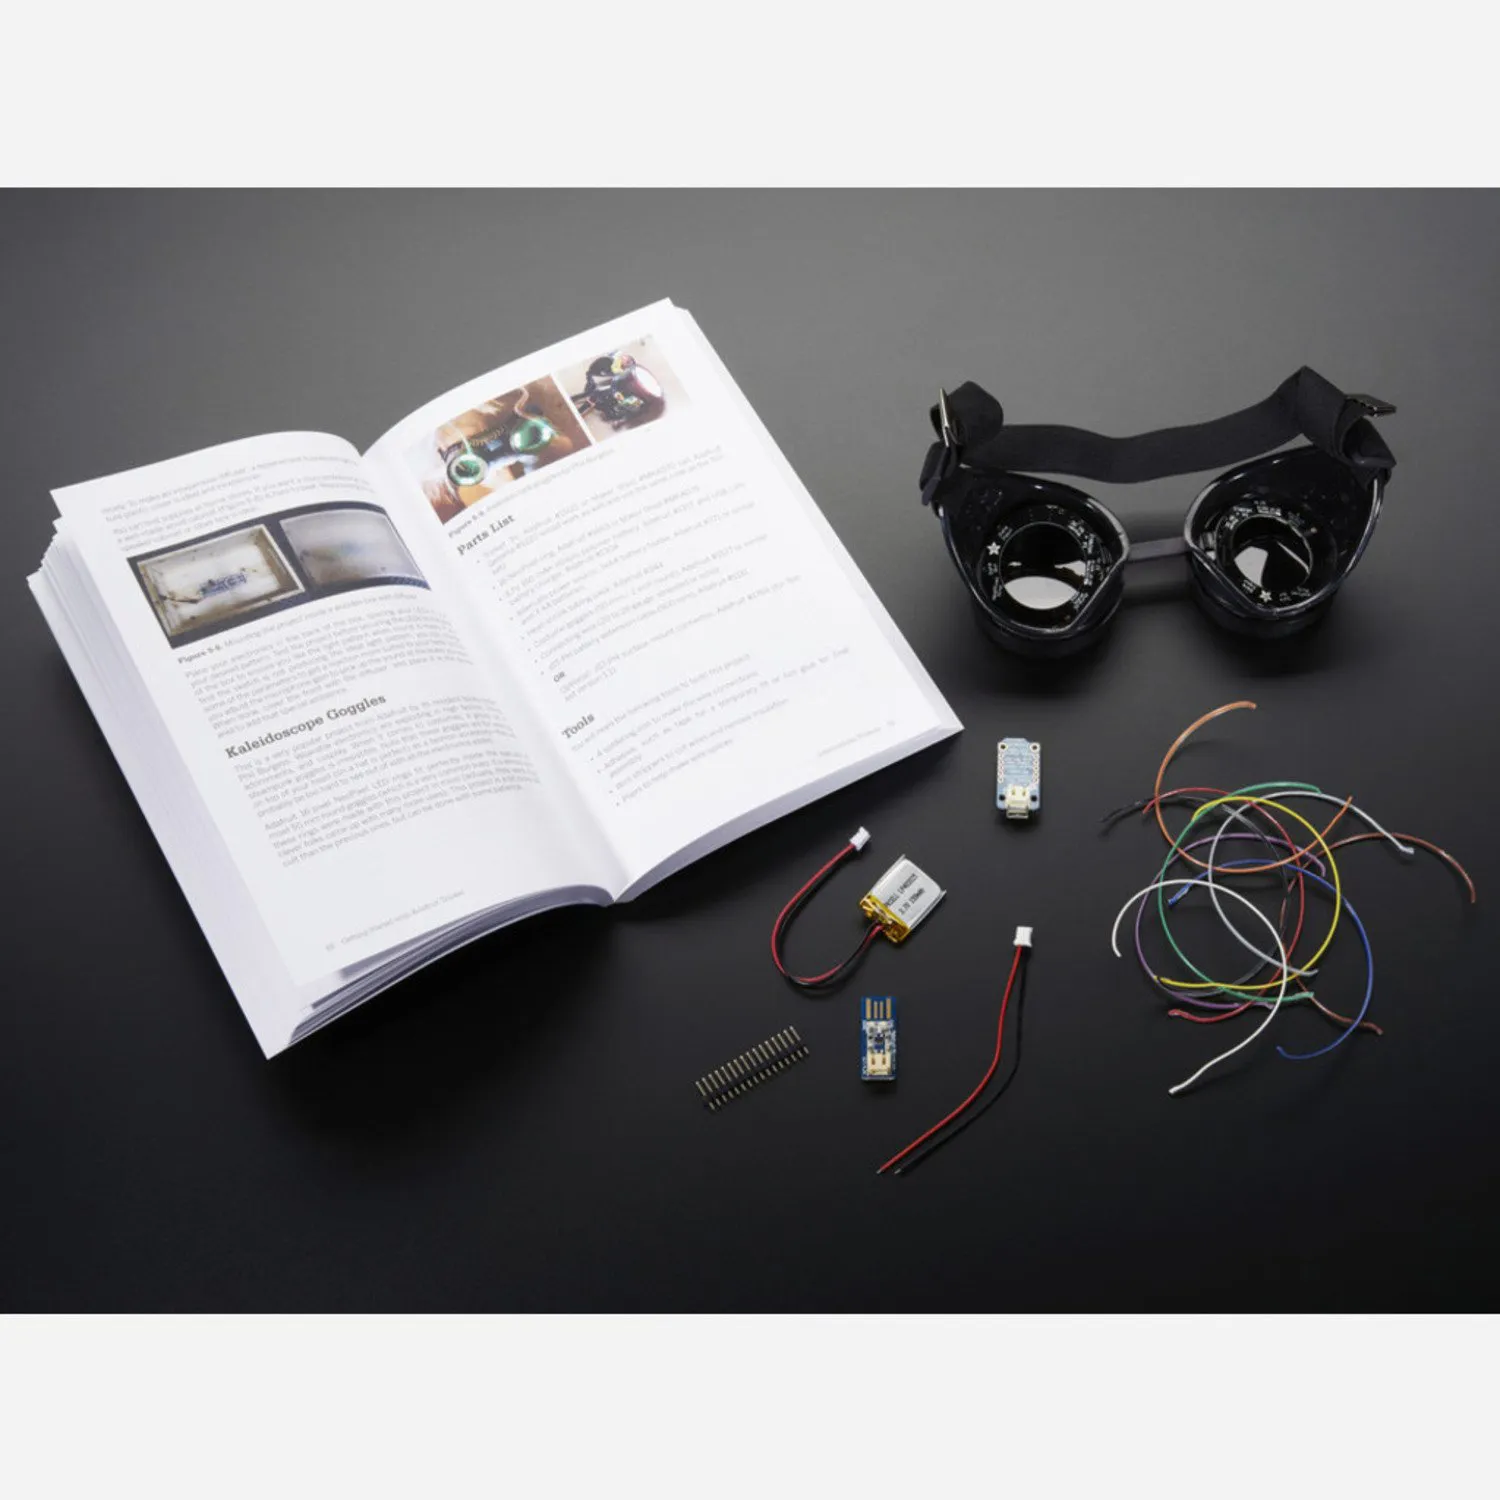 Photo of Getting Started with Trinket Book + NeoPixel Goggles Pack